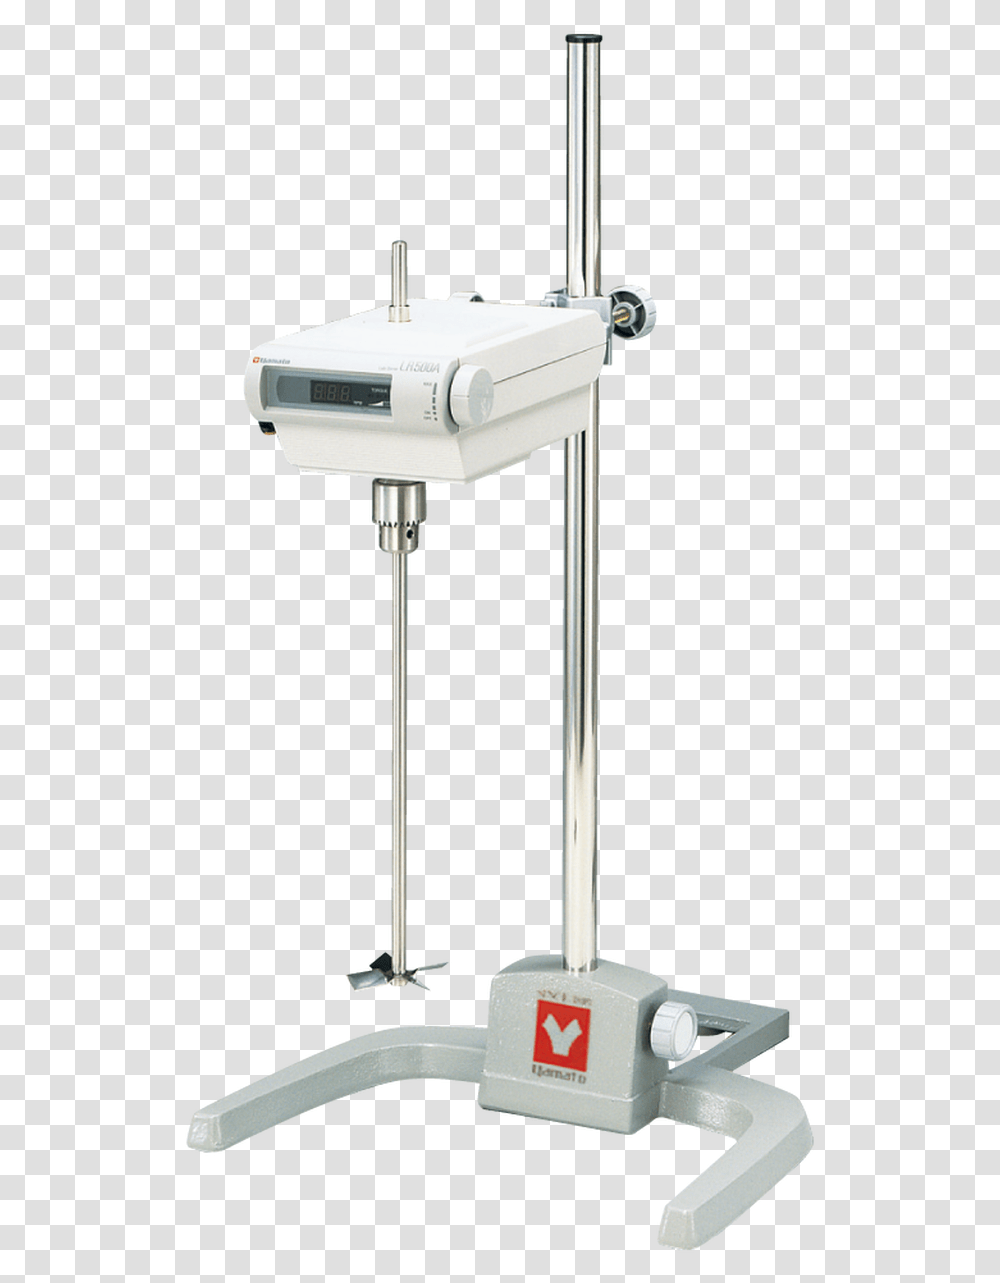 Yamato Lr 500 Series 1000 Rpm Laboratory Stirrer Exercise Machine, Sink Faucet, Projector, Lighting, Scale Transparent Png